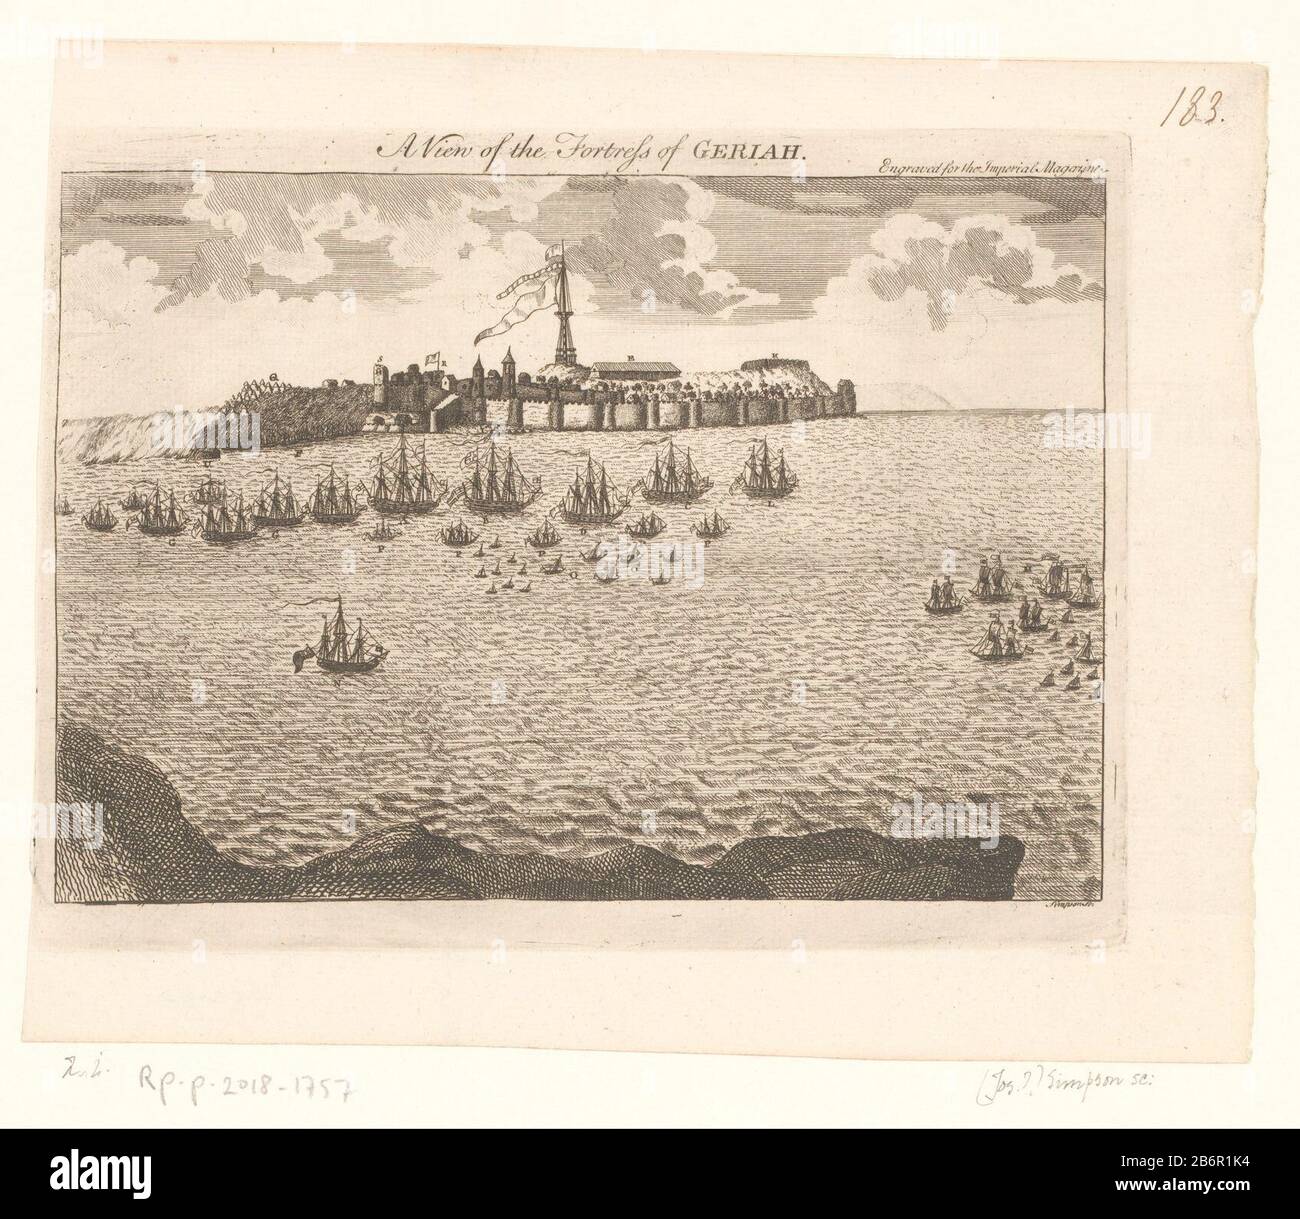 Gezicht op een Engelse vloot voor fort Geriah A view of the fortress of Geriah (titel op object) View of an English fleet fort GeriahA view of the fortress of Geriah (title object) Object type: picture Item number: RP-P-2018-1757 Inscriptions / Brands: collector's mark, verso, stamped: Lugt 2228 Manufacturer : printmaker: Simpson (listed building) client: Imperial Magazine (listed property) Date: on or after approx 1819 Material: paper Technique: etching dimensions: plate edge: h 175 mm × W 234 mm Subject: fortress where India Stock Photo